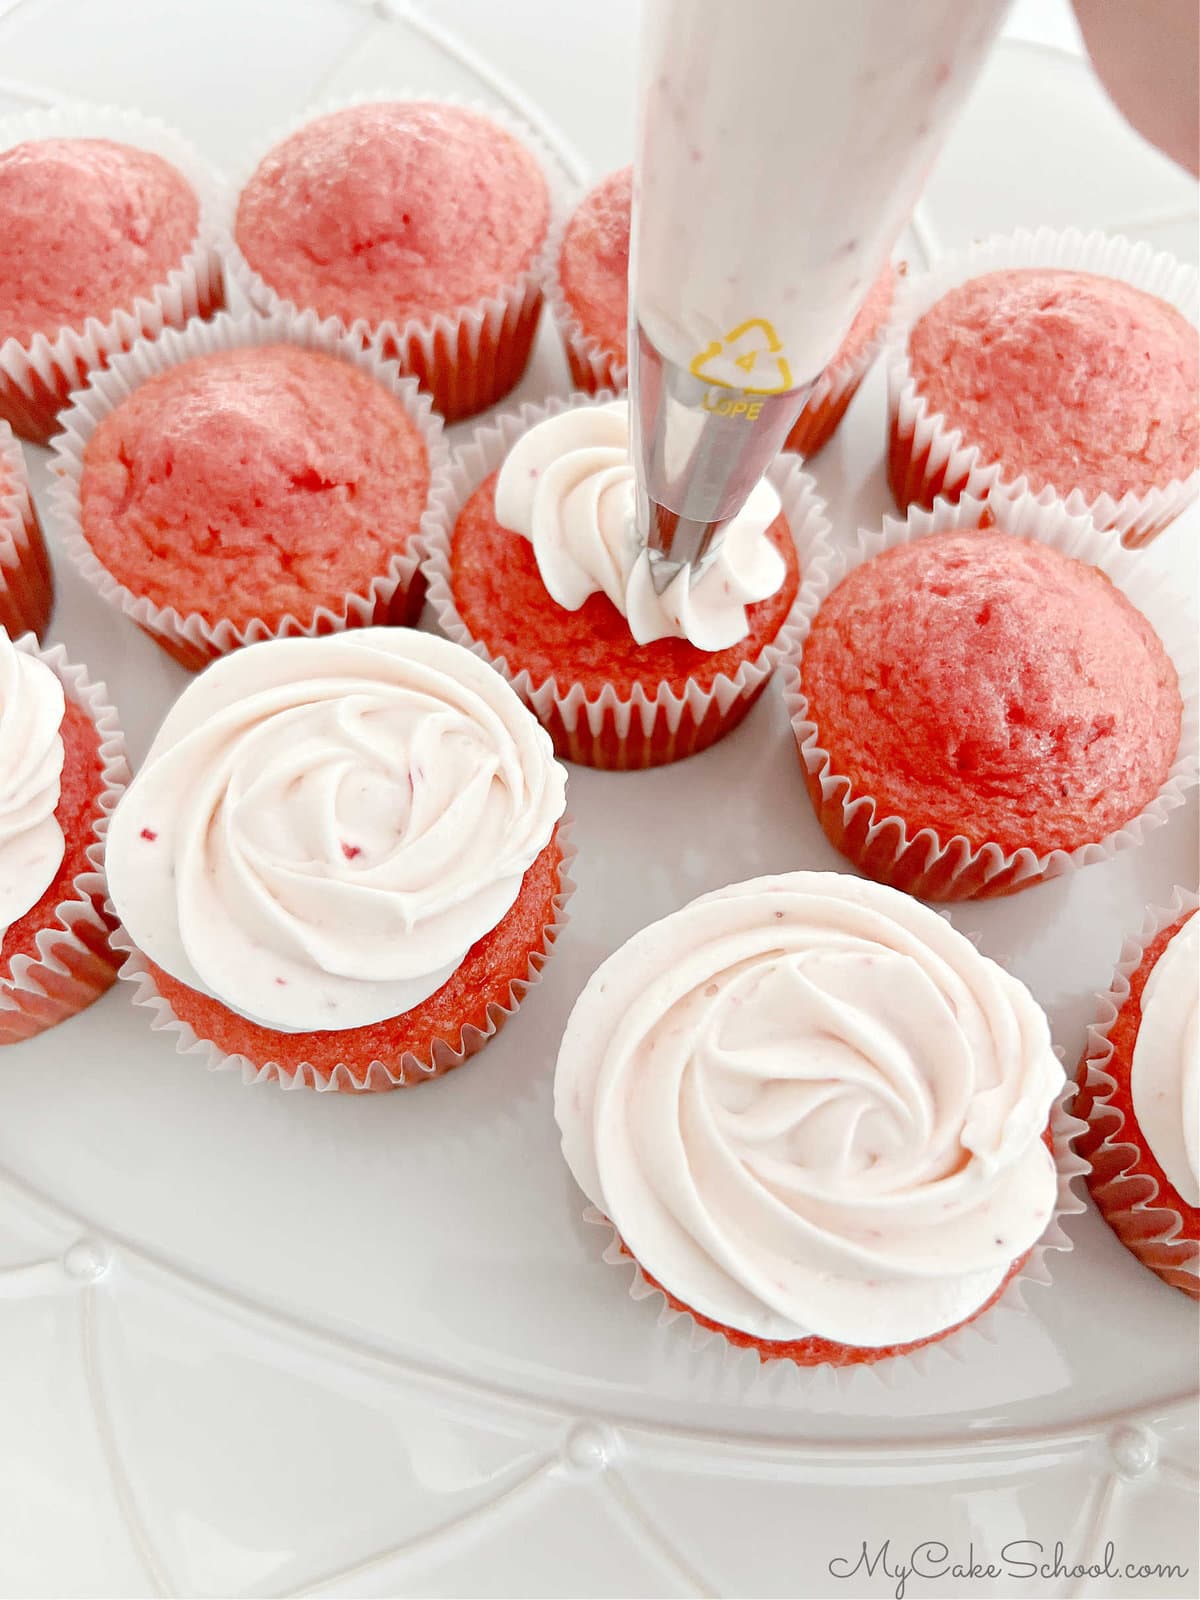 Piping frosting onto strawberry cupcakes using a 1M star tip